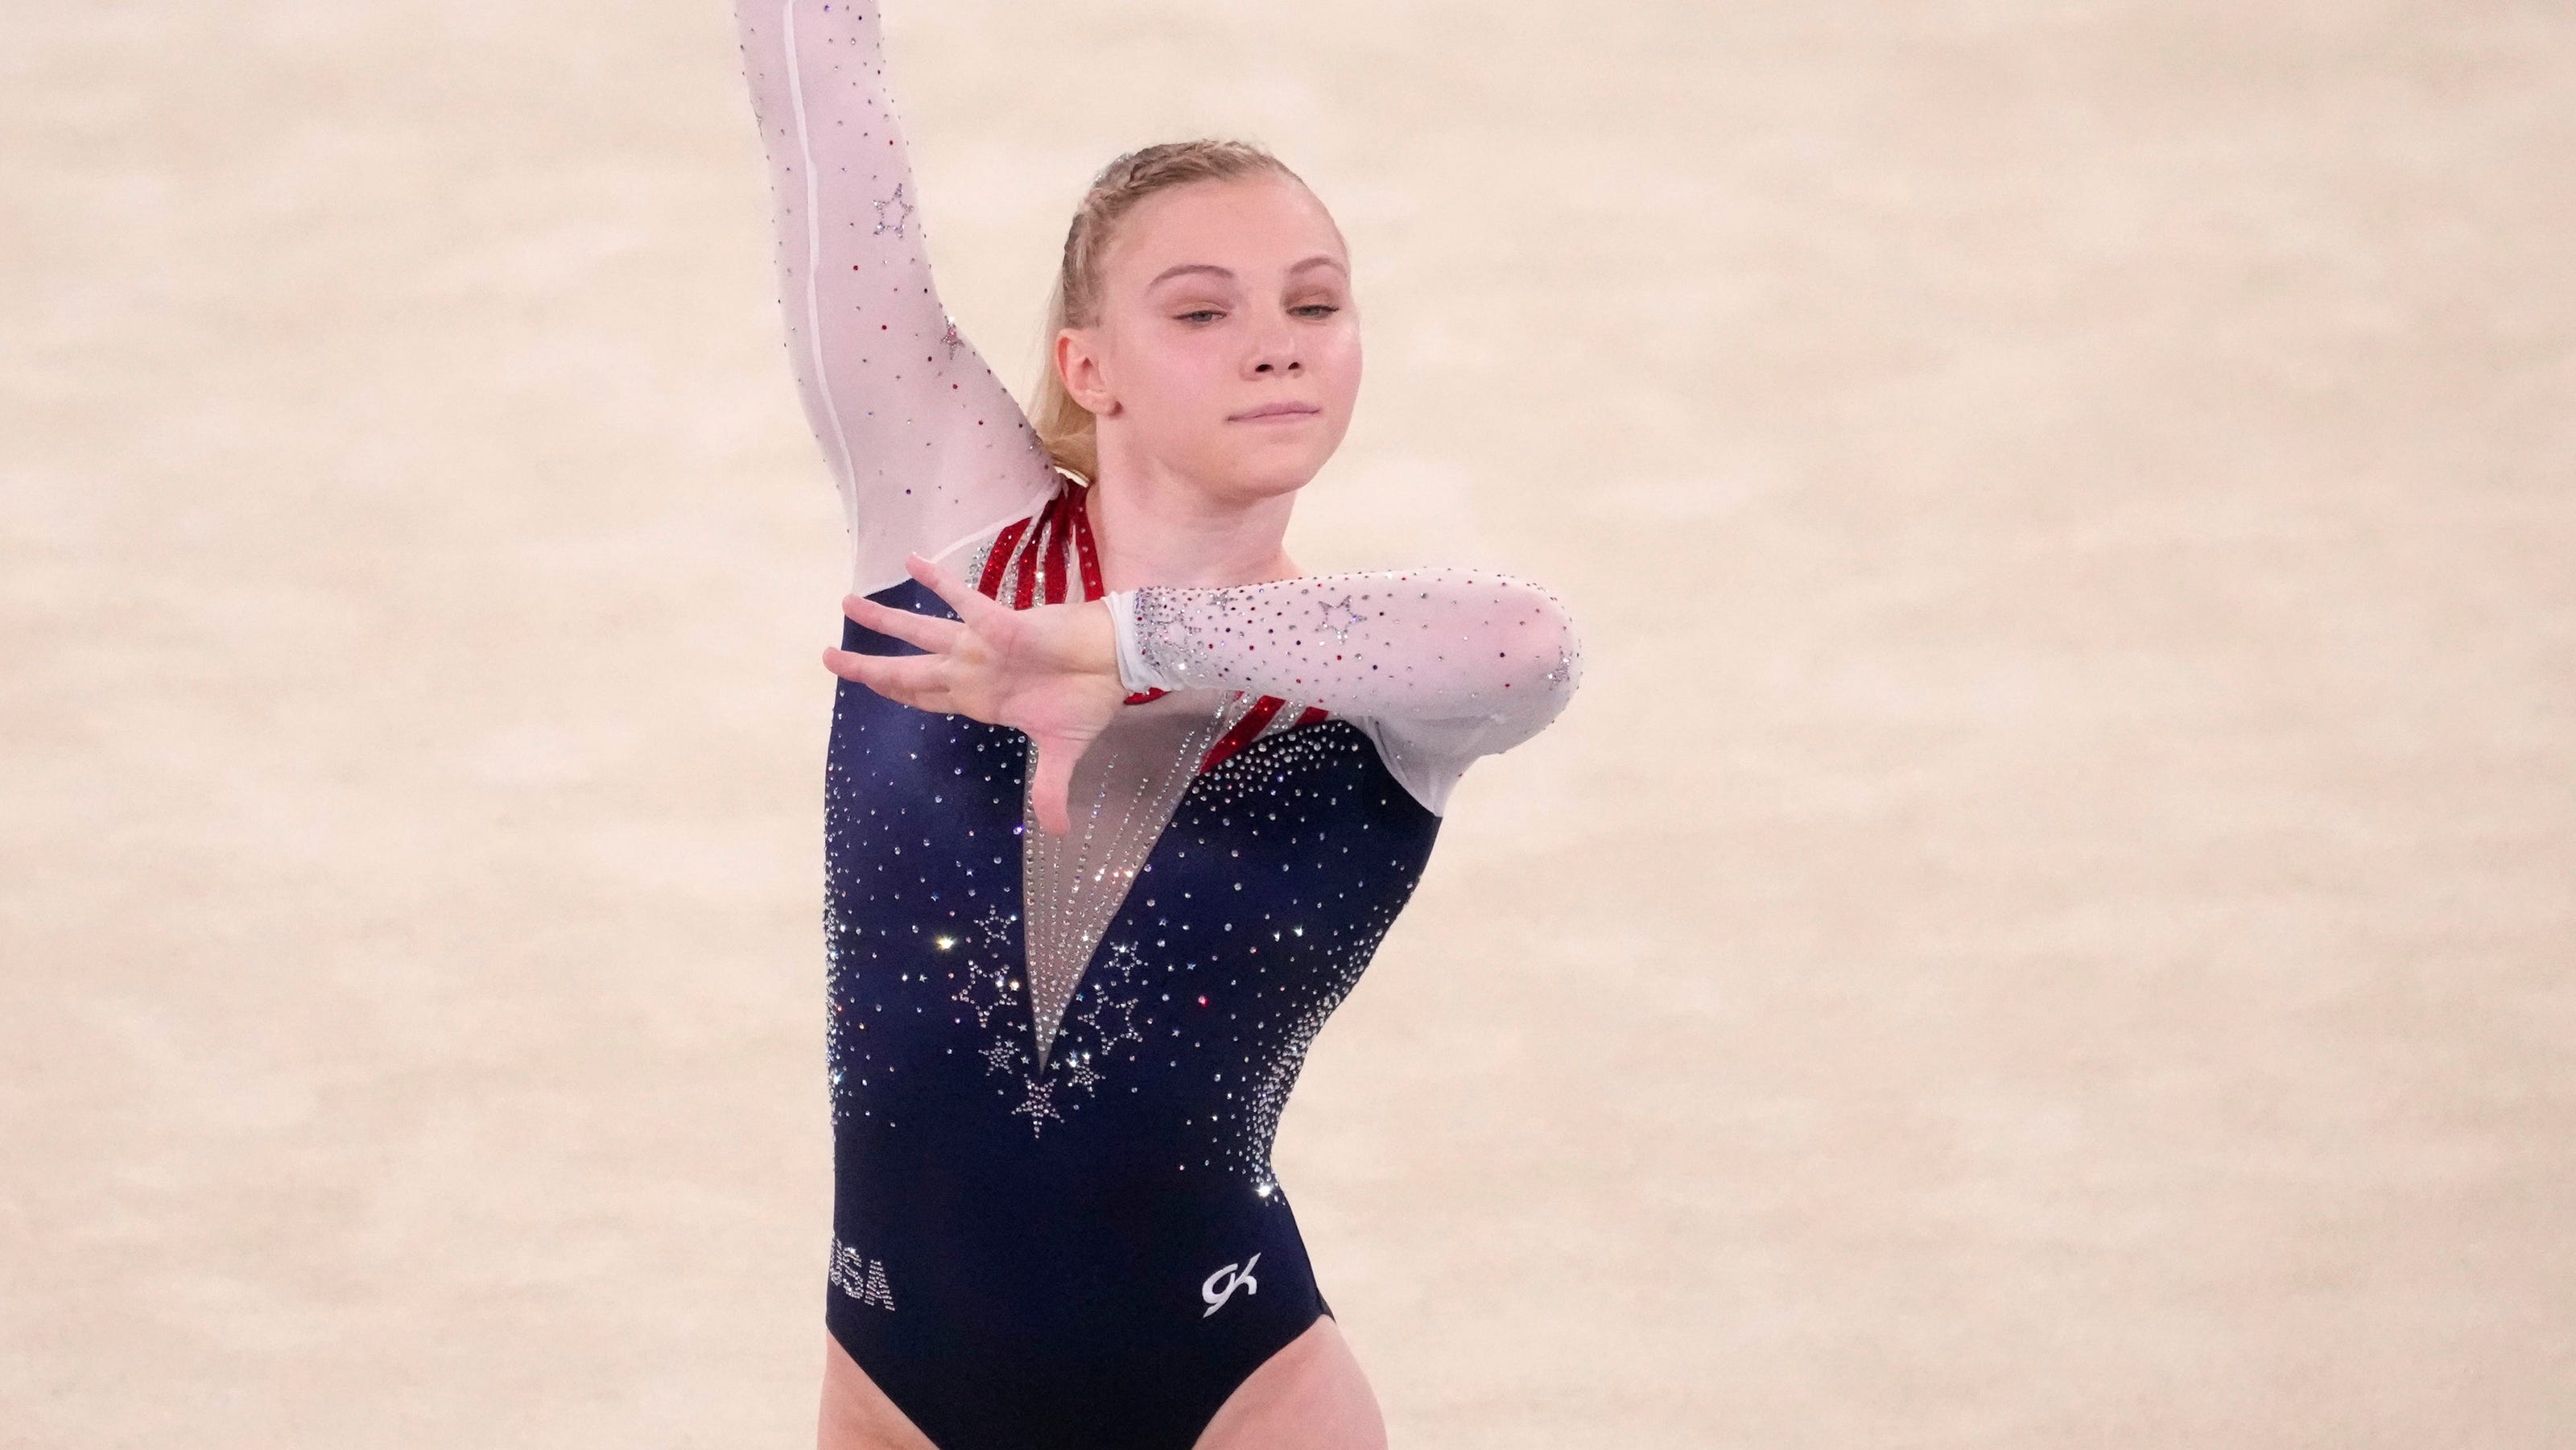 Jade Carey wins gold medal in floor exercise at Tokyo Olympics